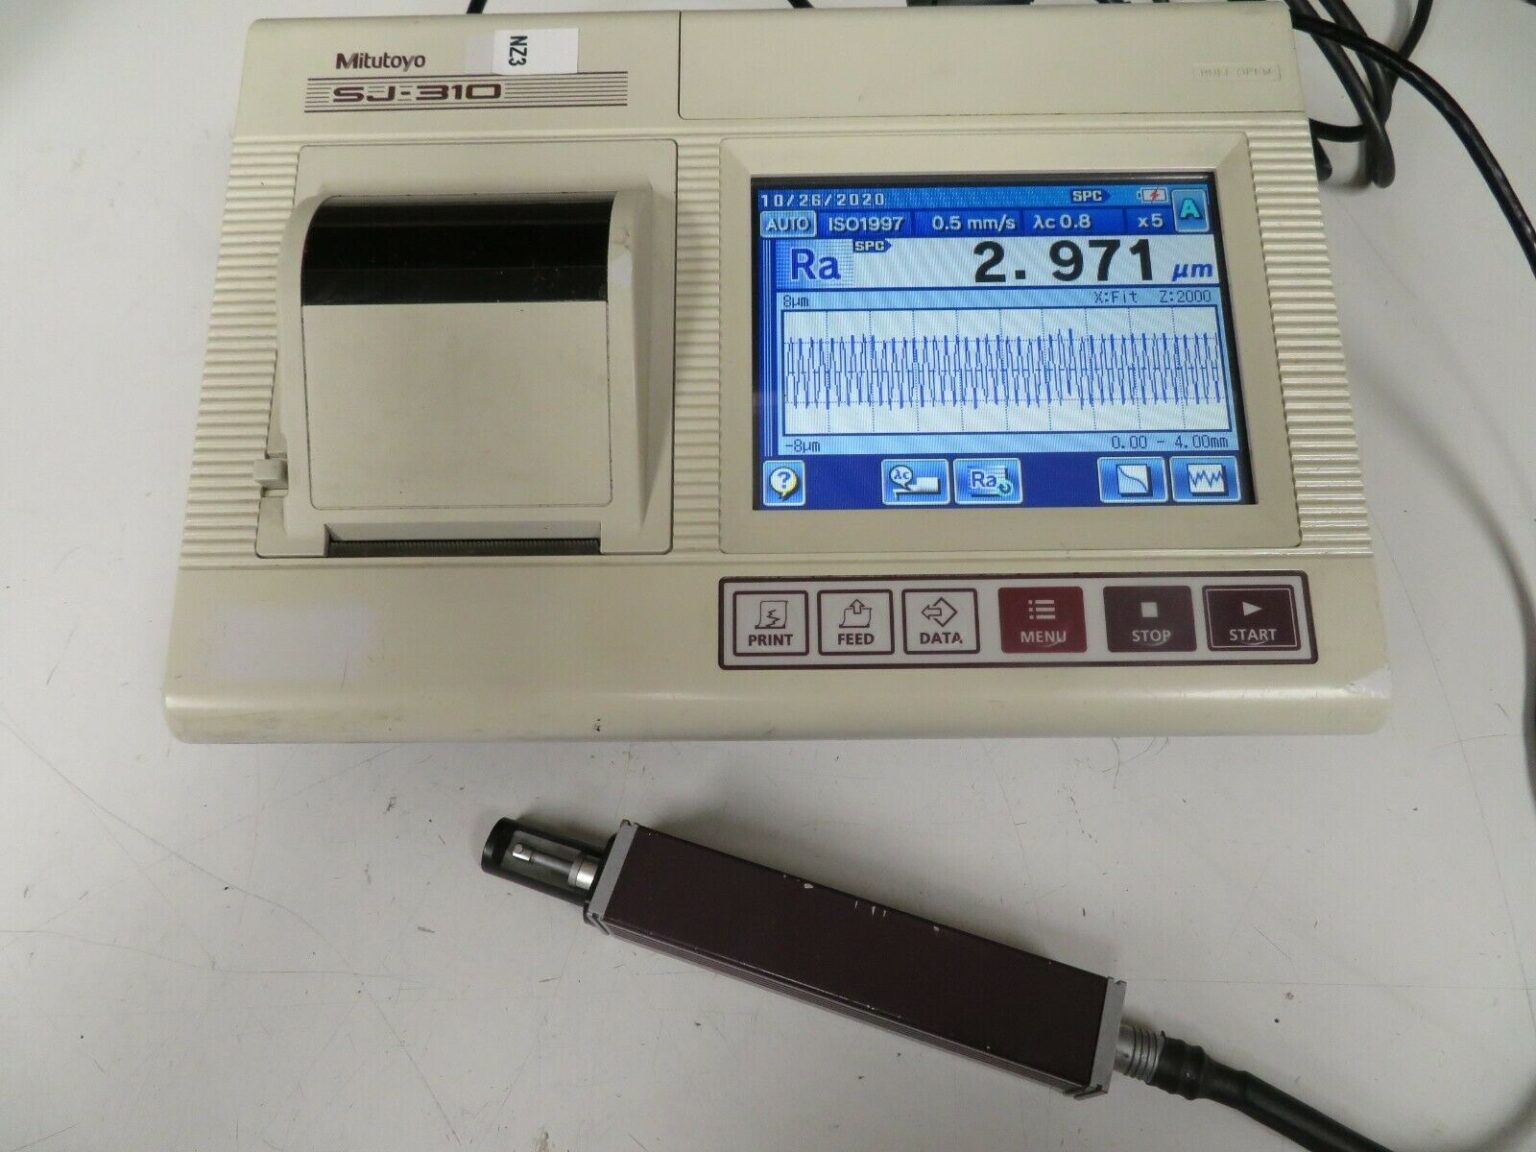 Mitutoyo Sj 310 Profilometer Surface Finish Tester Complete Tested